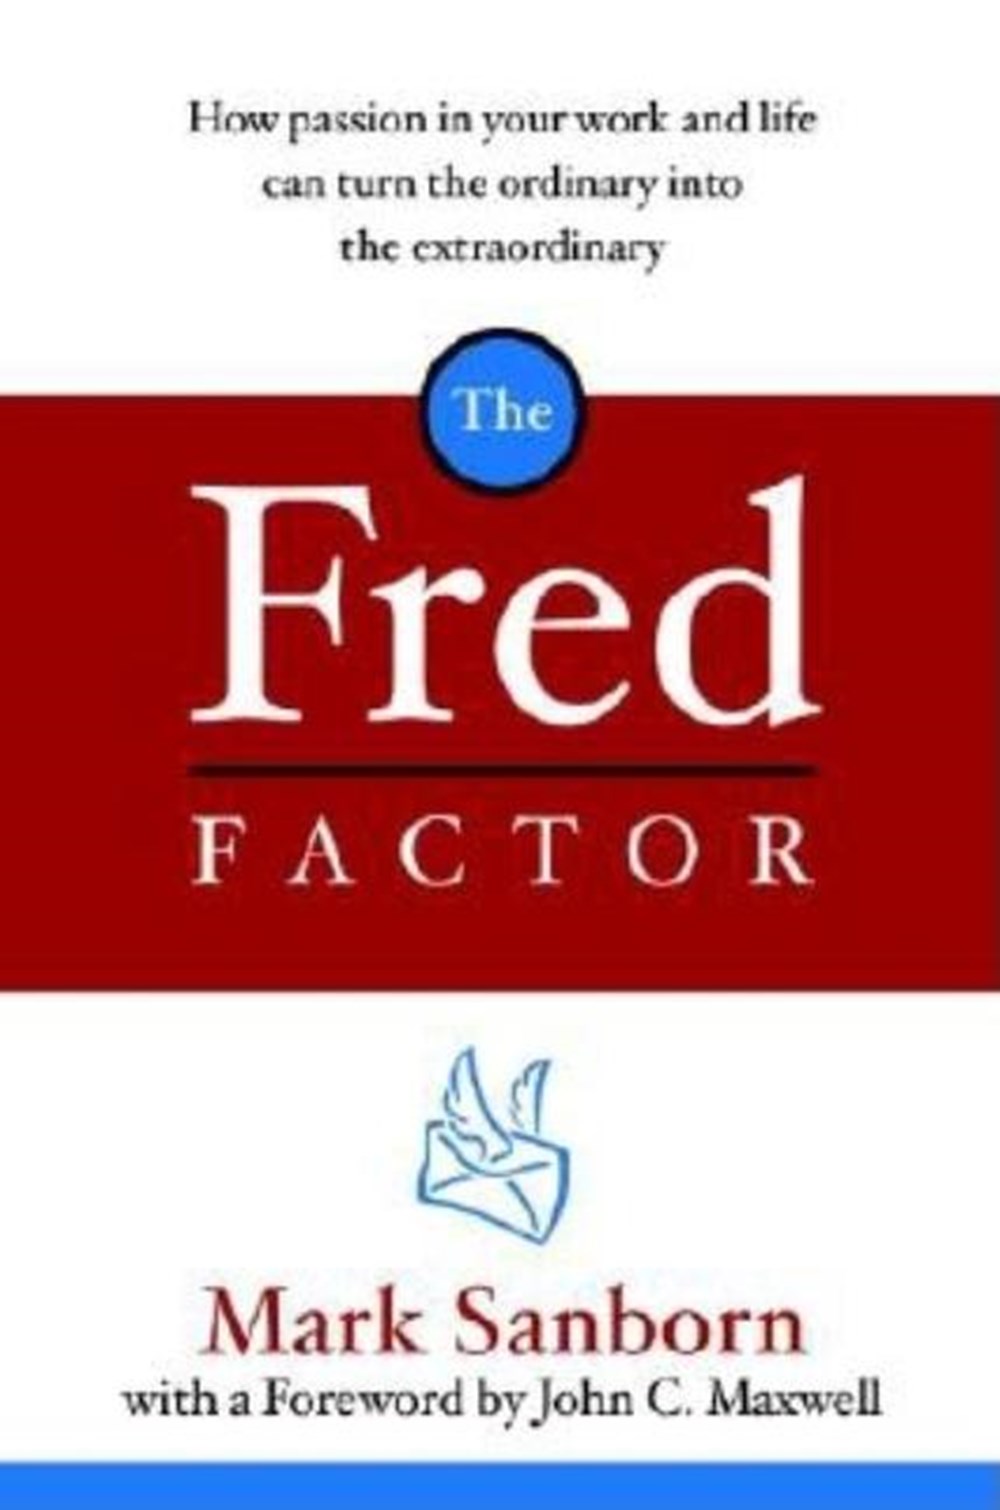 Fred Factor How Passion in Your Work and Life Can Turn the Ordinary Into the Extraordinary